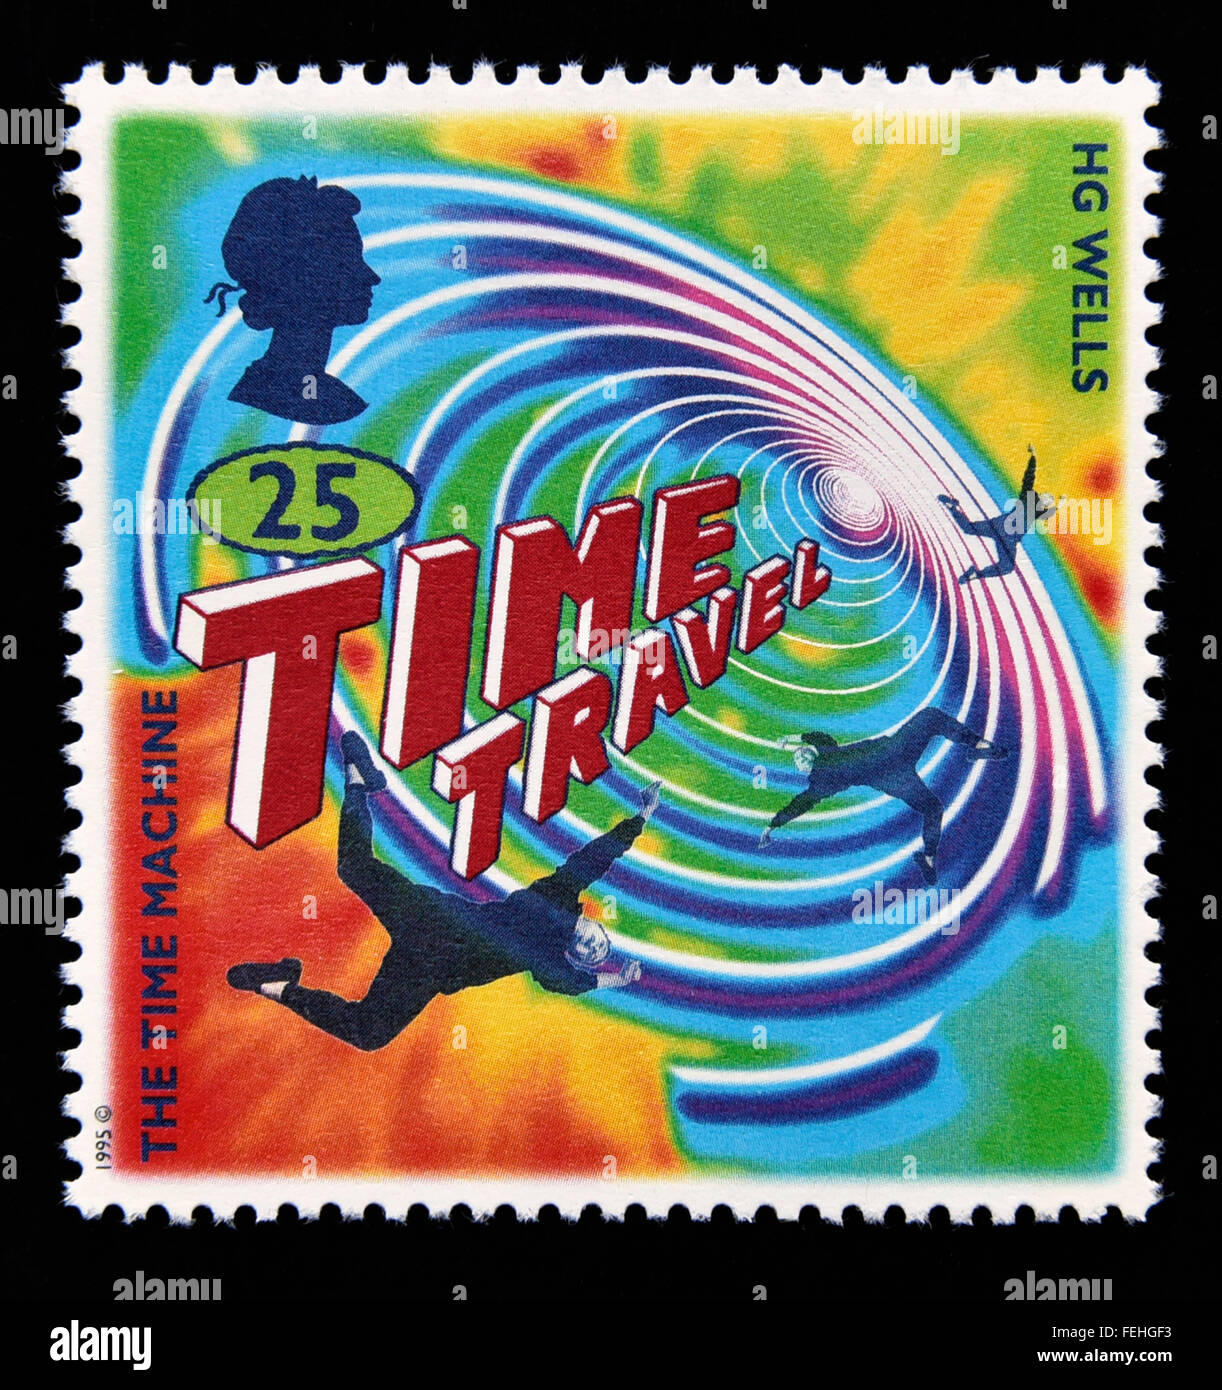 Postage stamp. Great Britain. Queen Elizabeth II. 1995. Science Fiction. Novels by H.G.Wells. 'The Time Machine'. 25p. Stock Photo